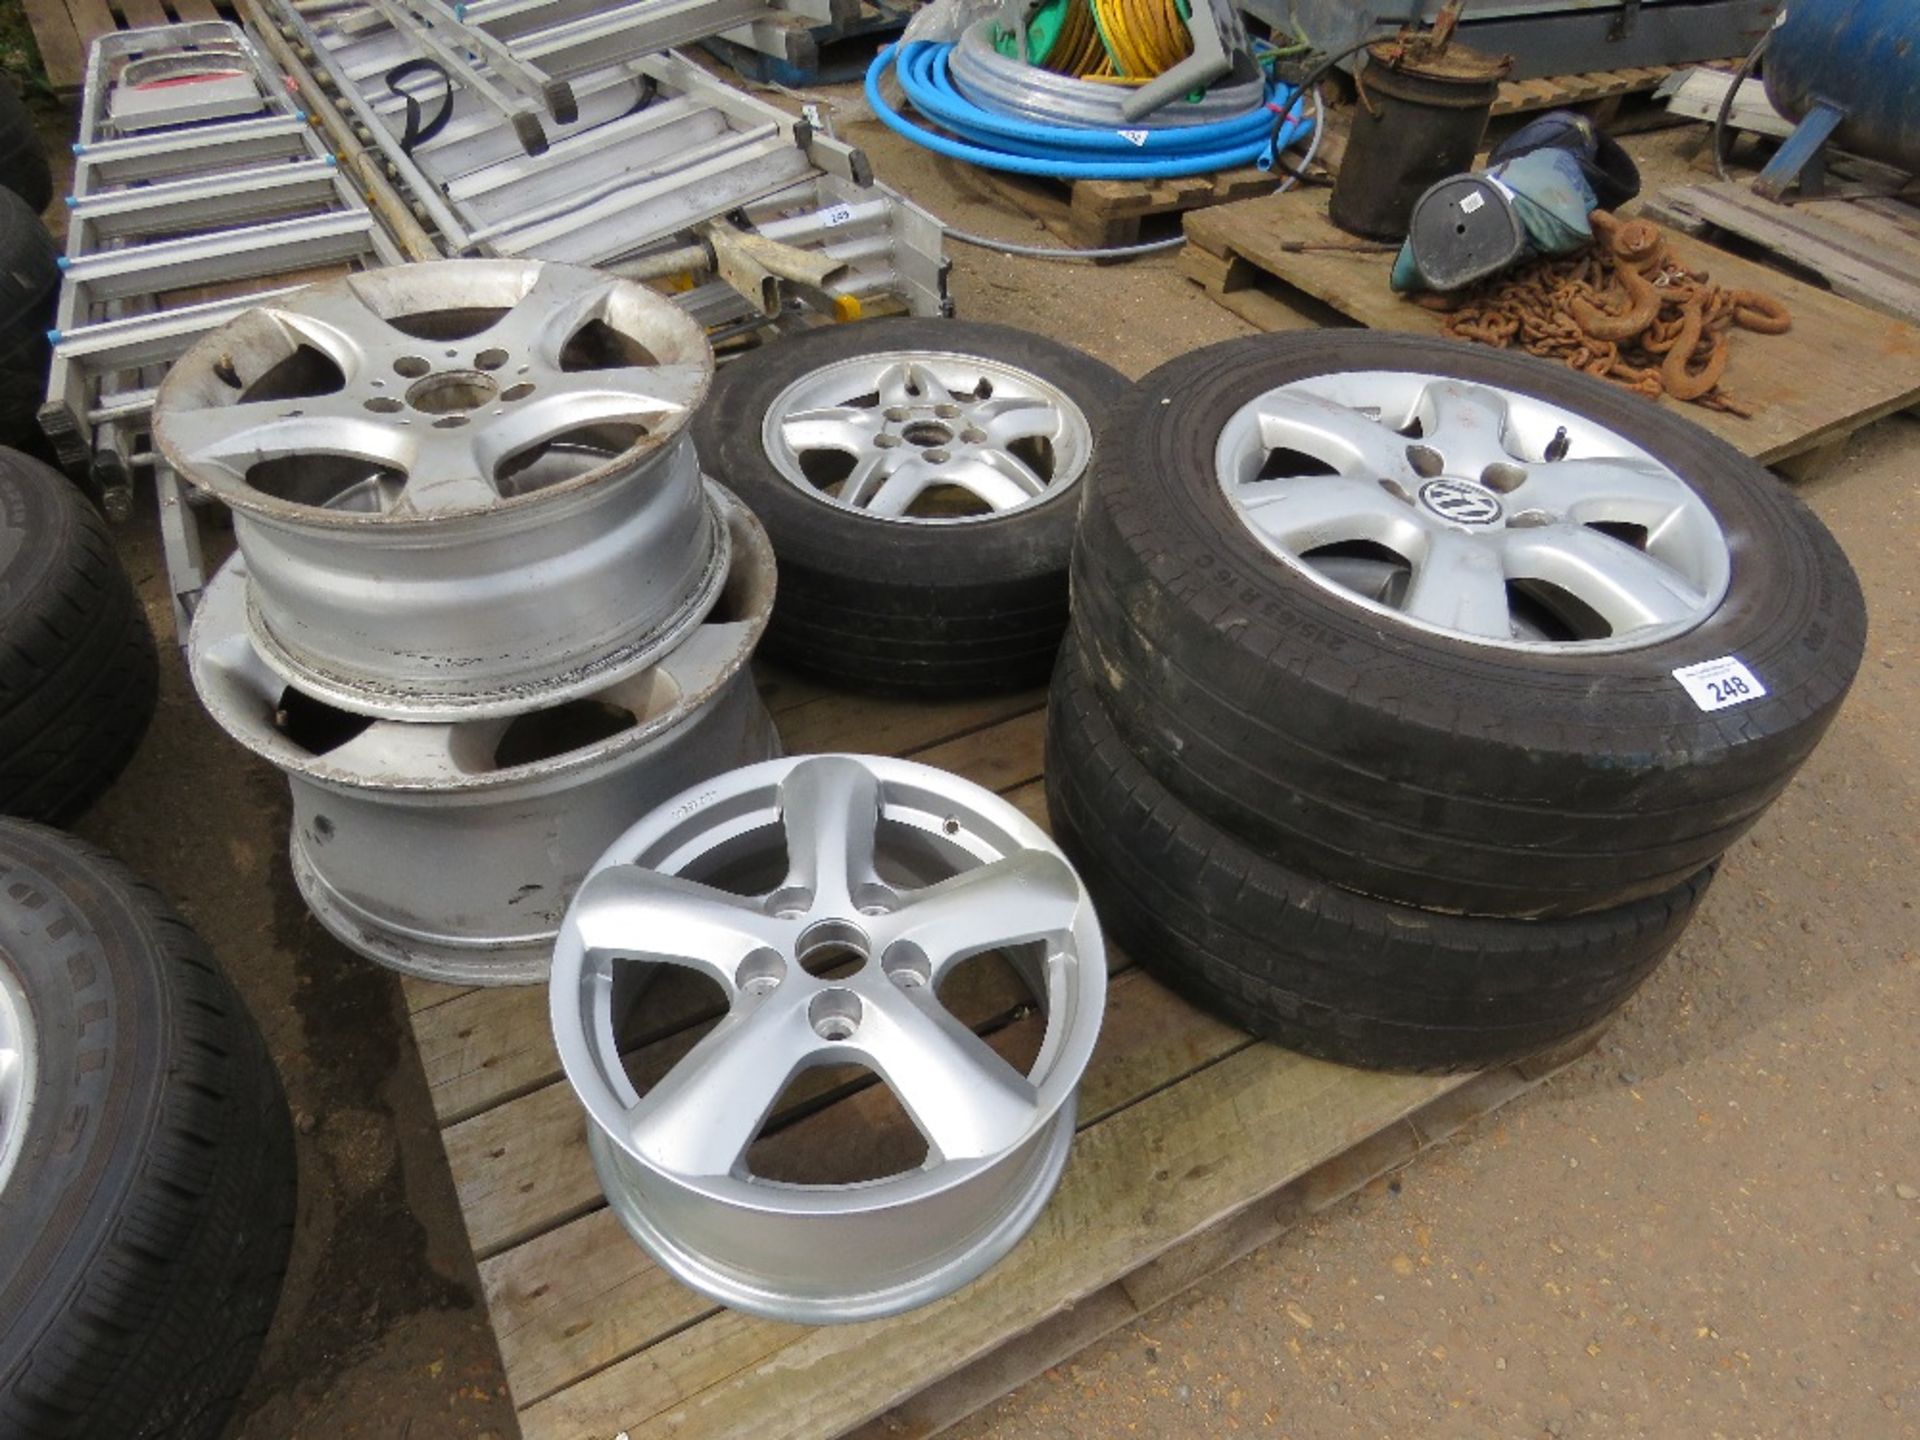 3NO VW ALLOY WHEELS AND TYRES PLUS 3NO RIMS.